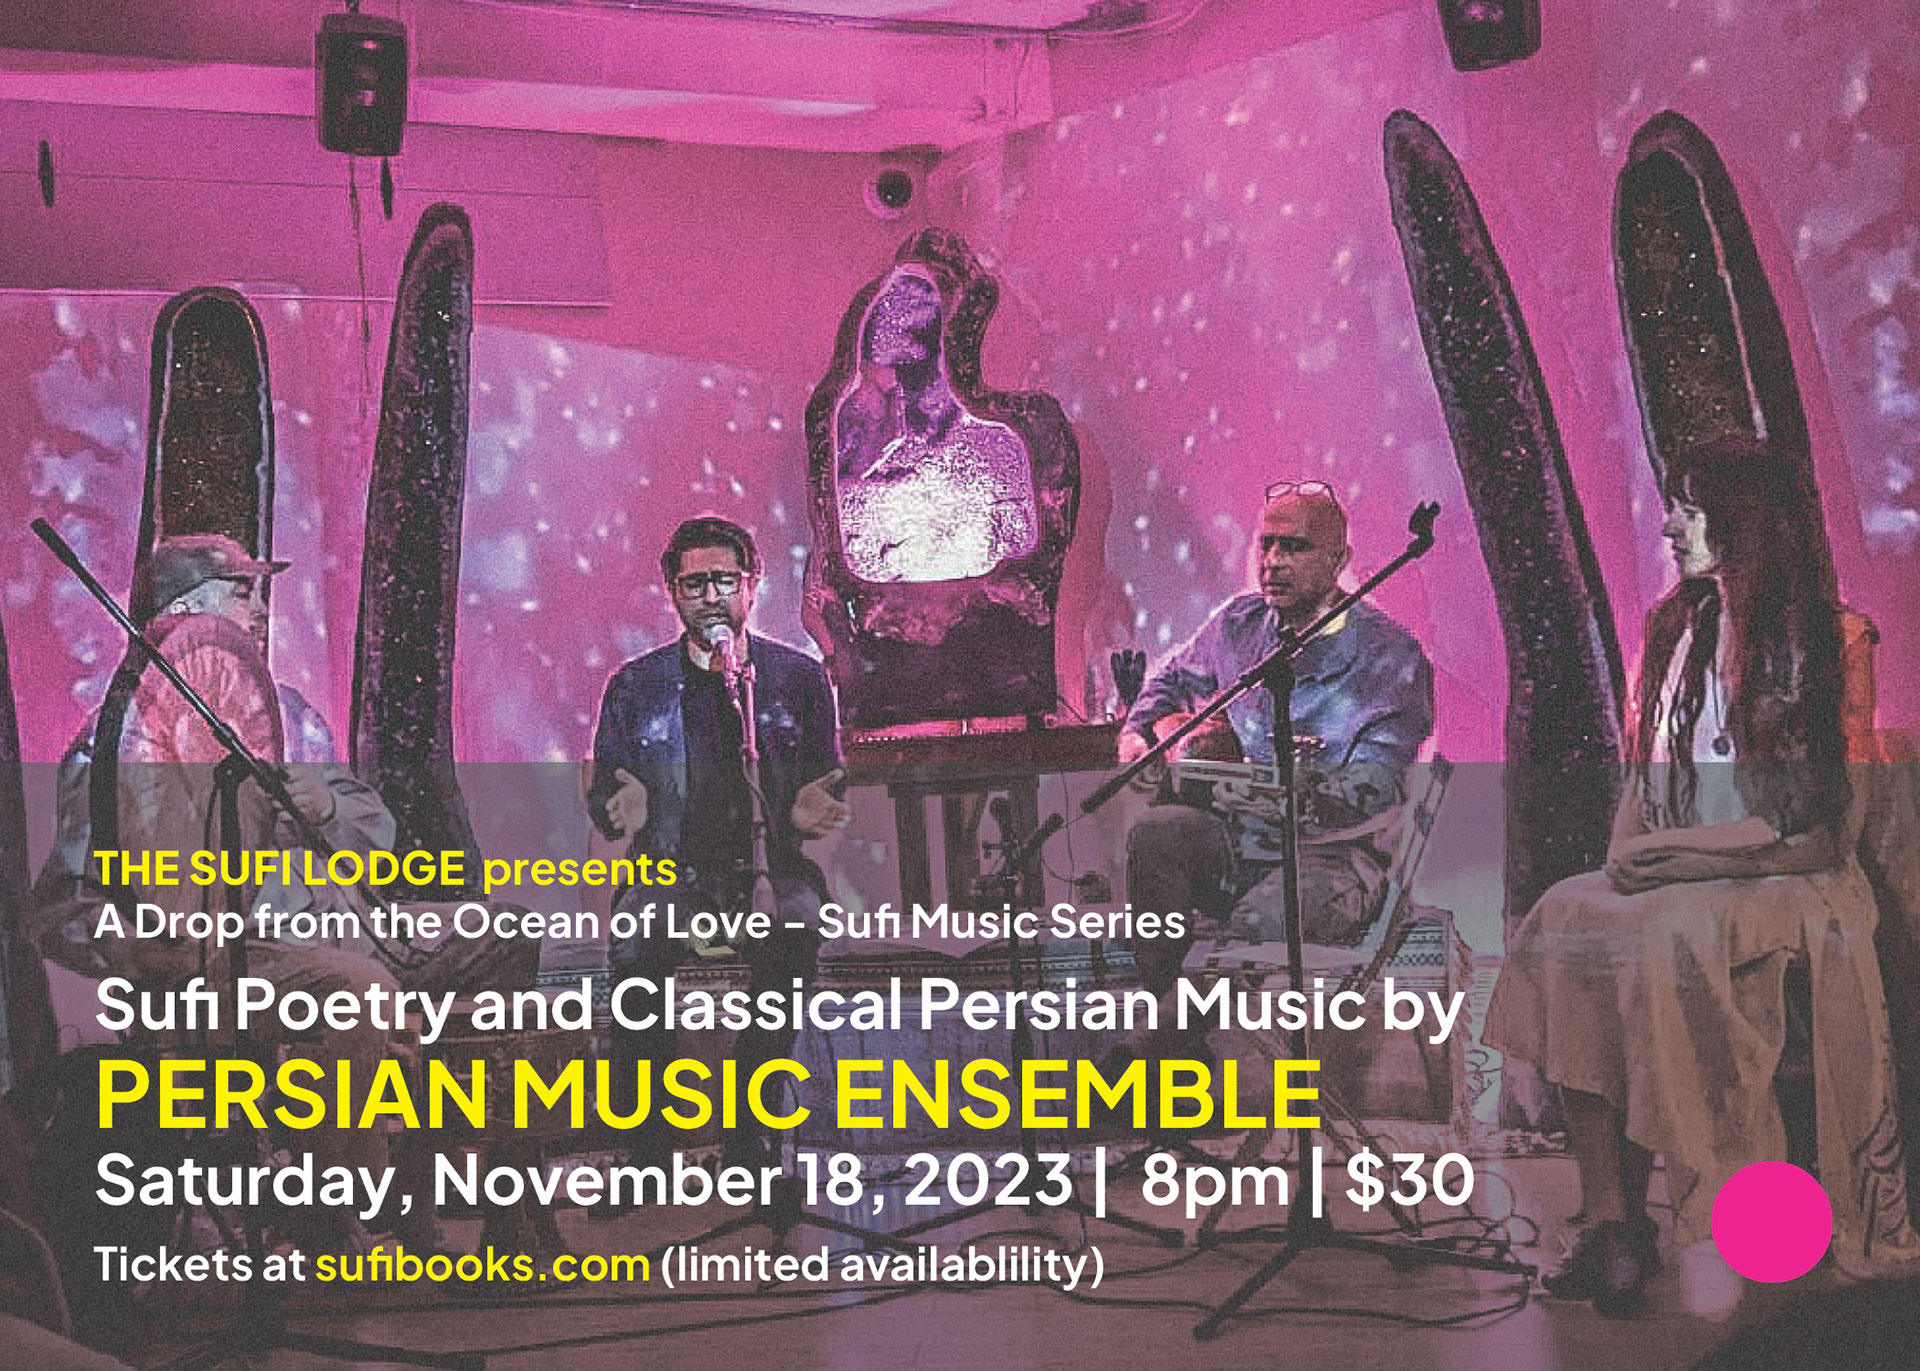 CANCELED: Saturday, November 18, 2023 | Sufi Poetry and Classical Persian Music by Persian Music Ensemble